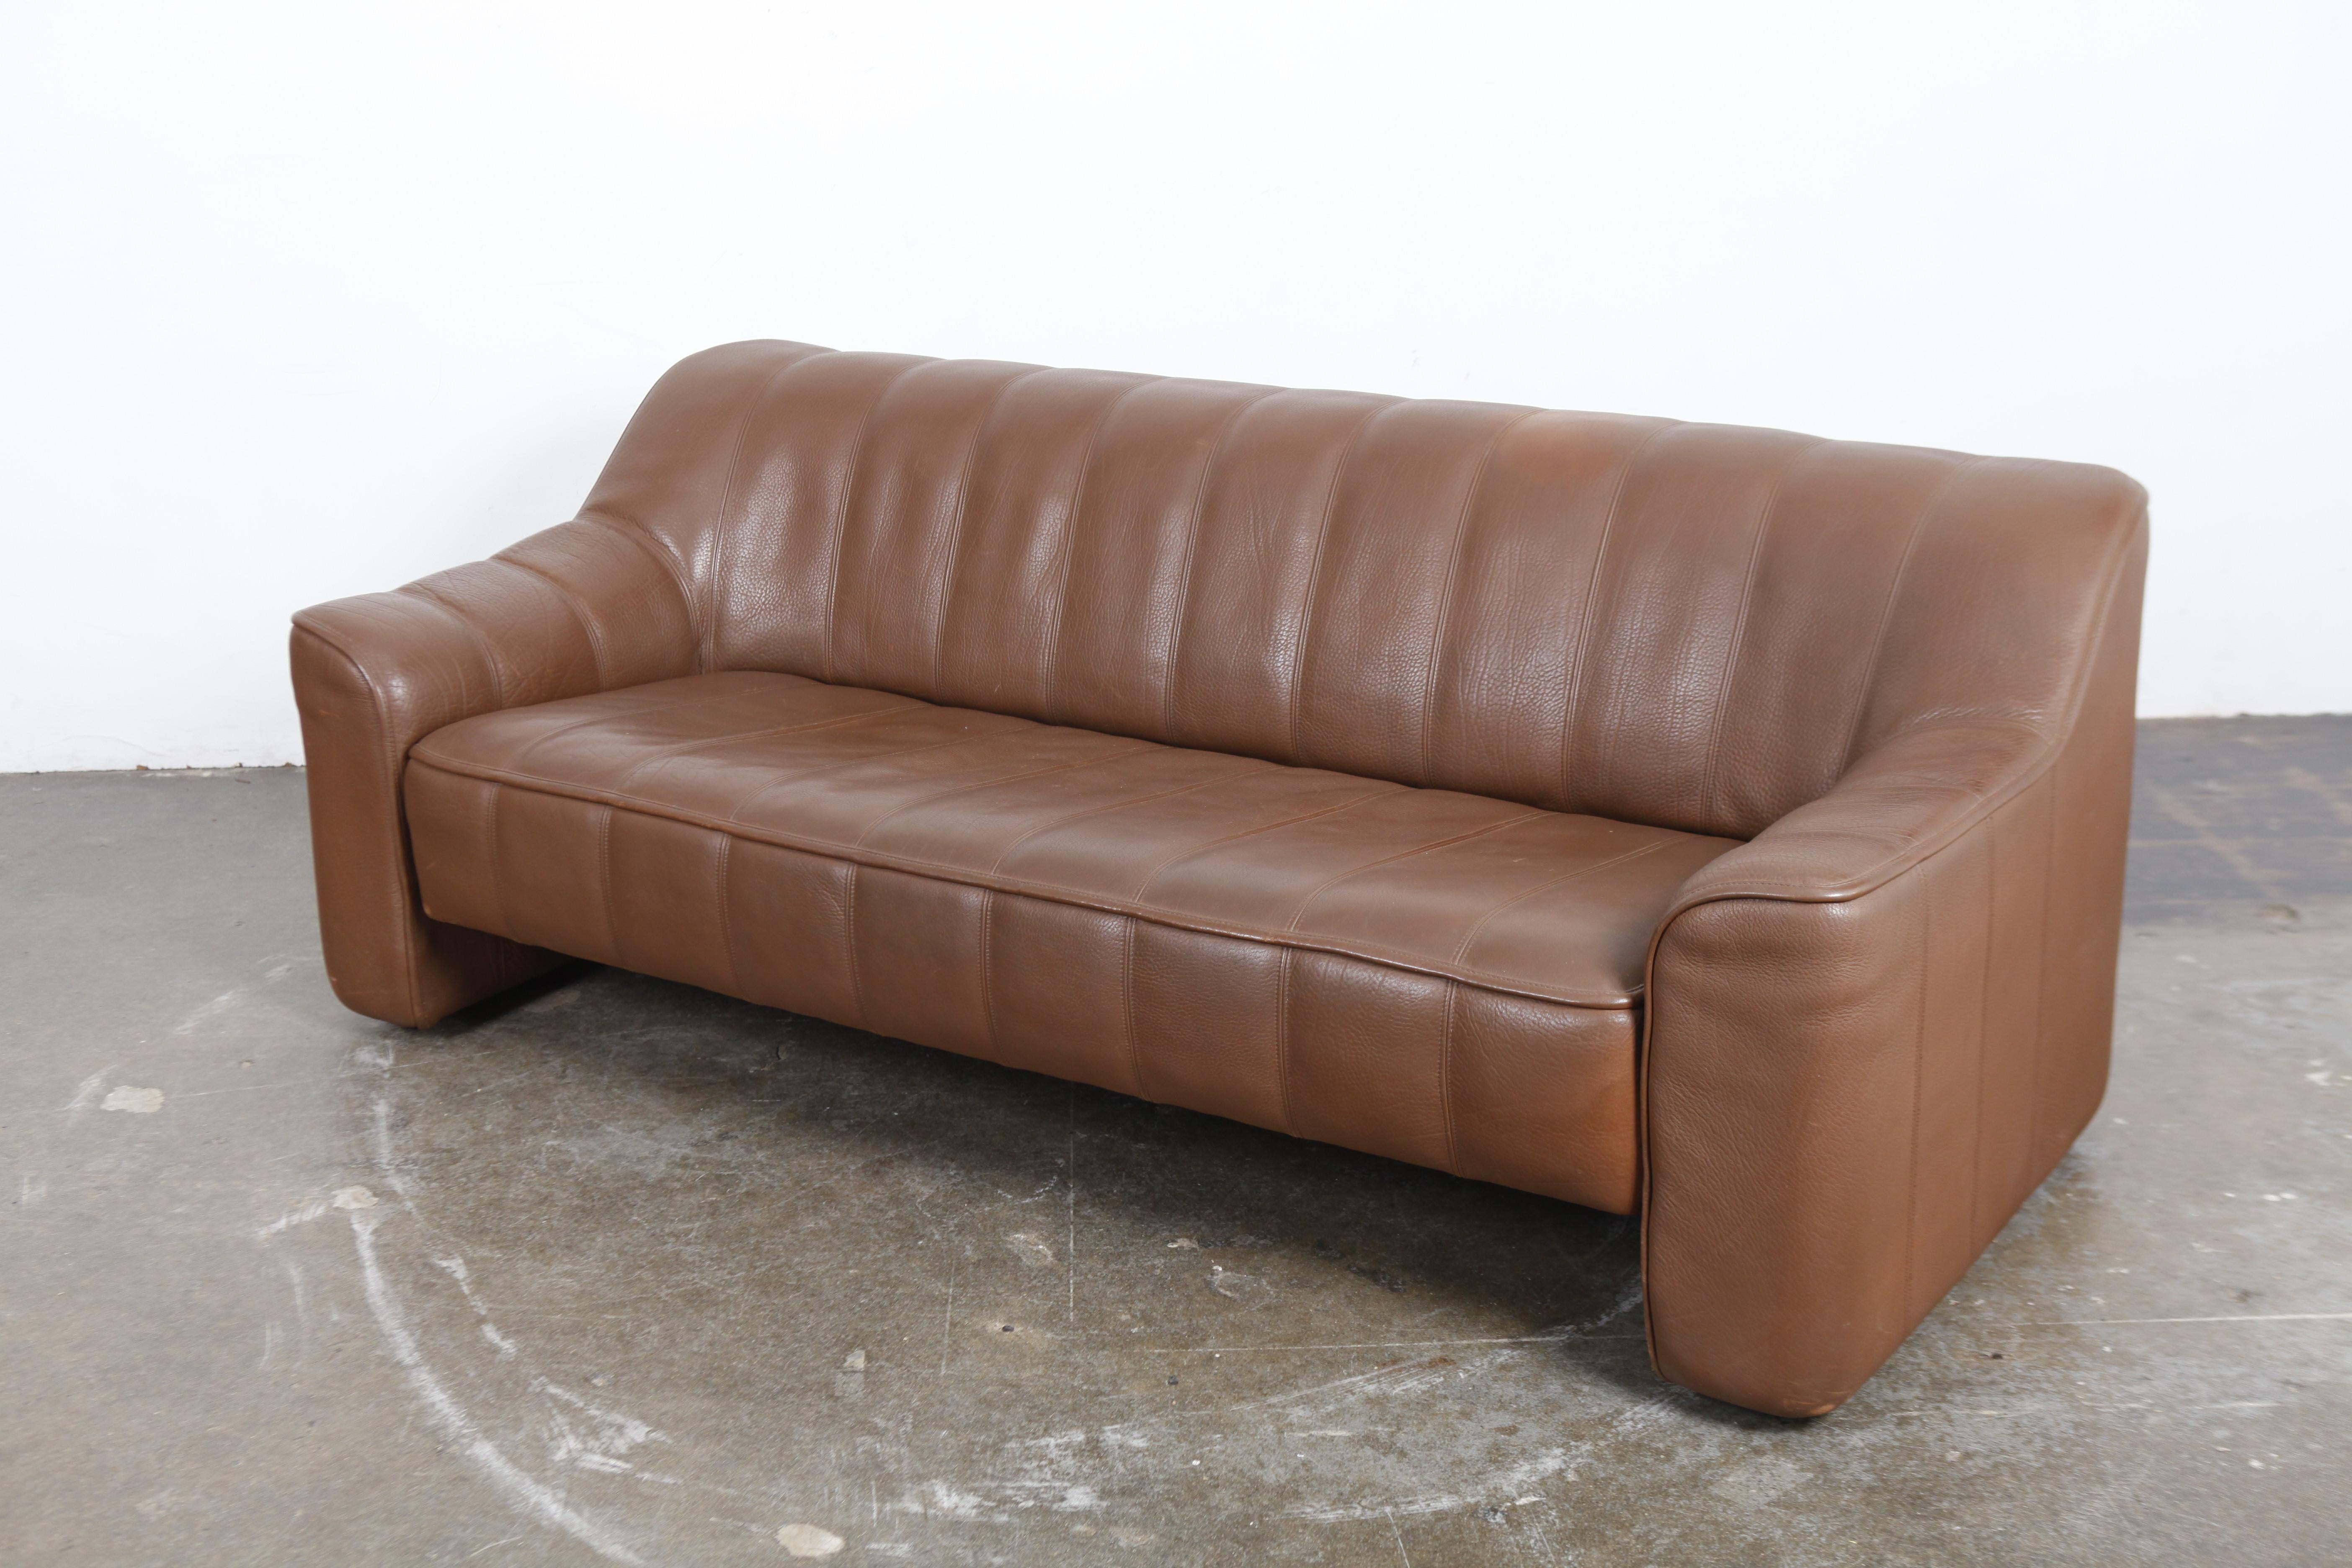 1970s De Sede Leather 3-Seat Sofa 'Model DS 44' from Switzerland For Sale 3